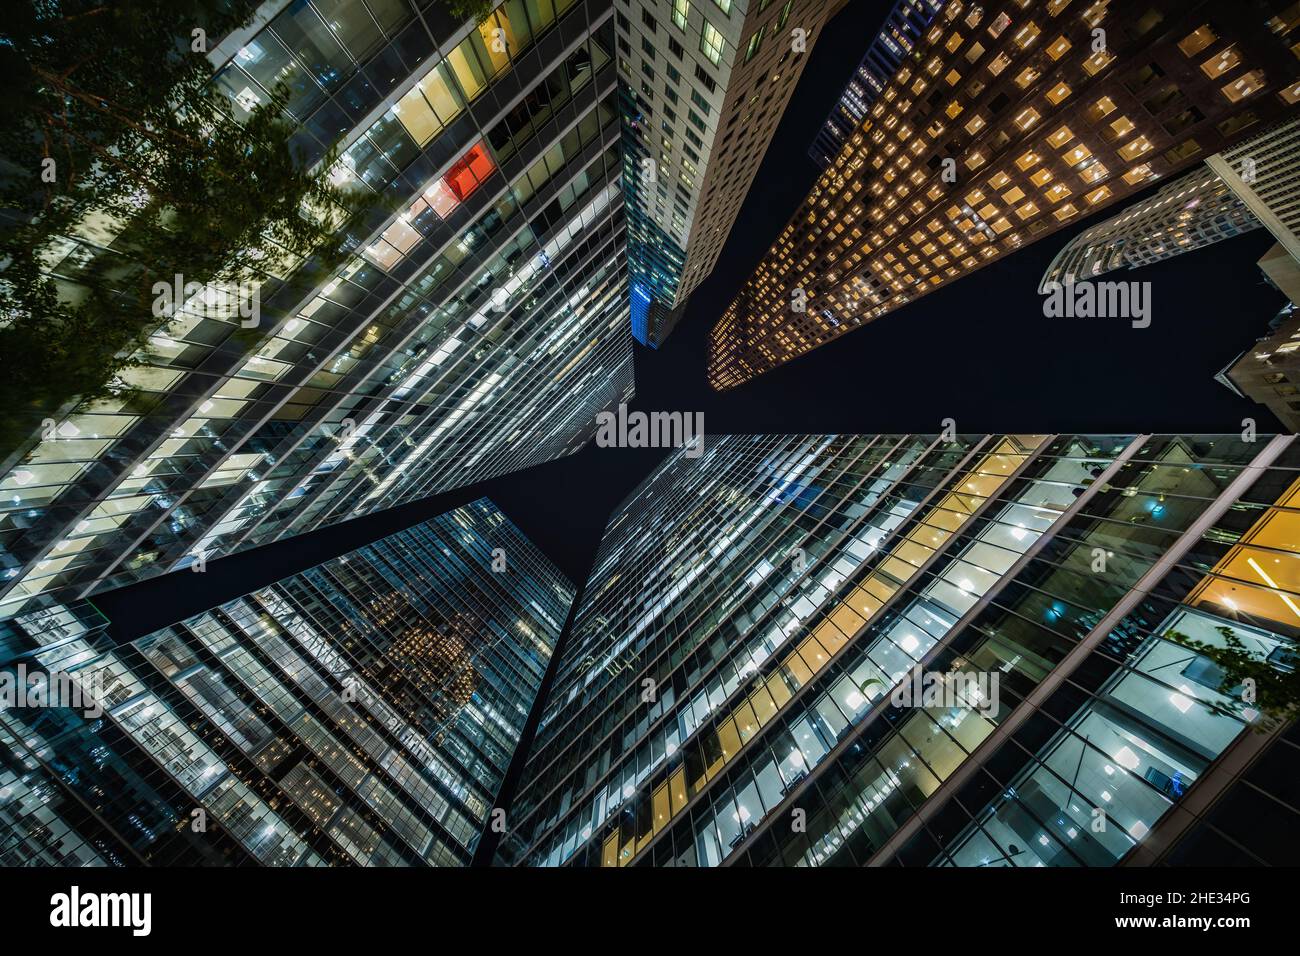 Business and finance concept, looking up at high rise office building architecture at night in the financial district of a modern metropolis. Stock Photo